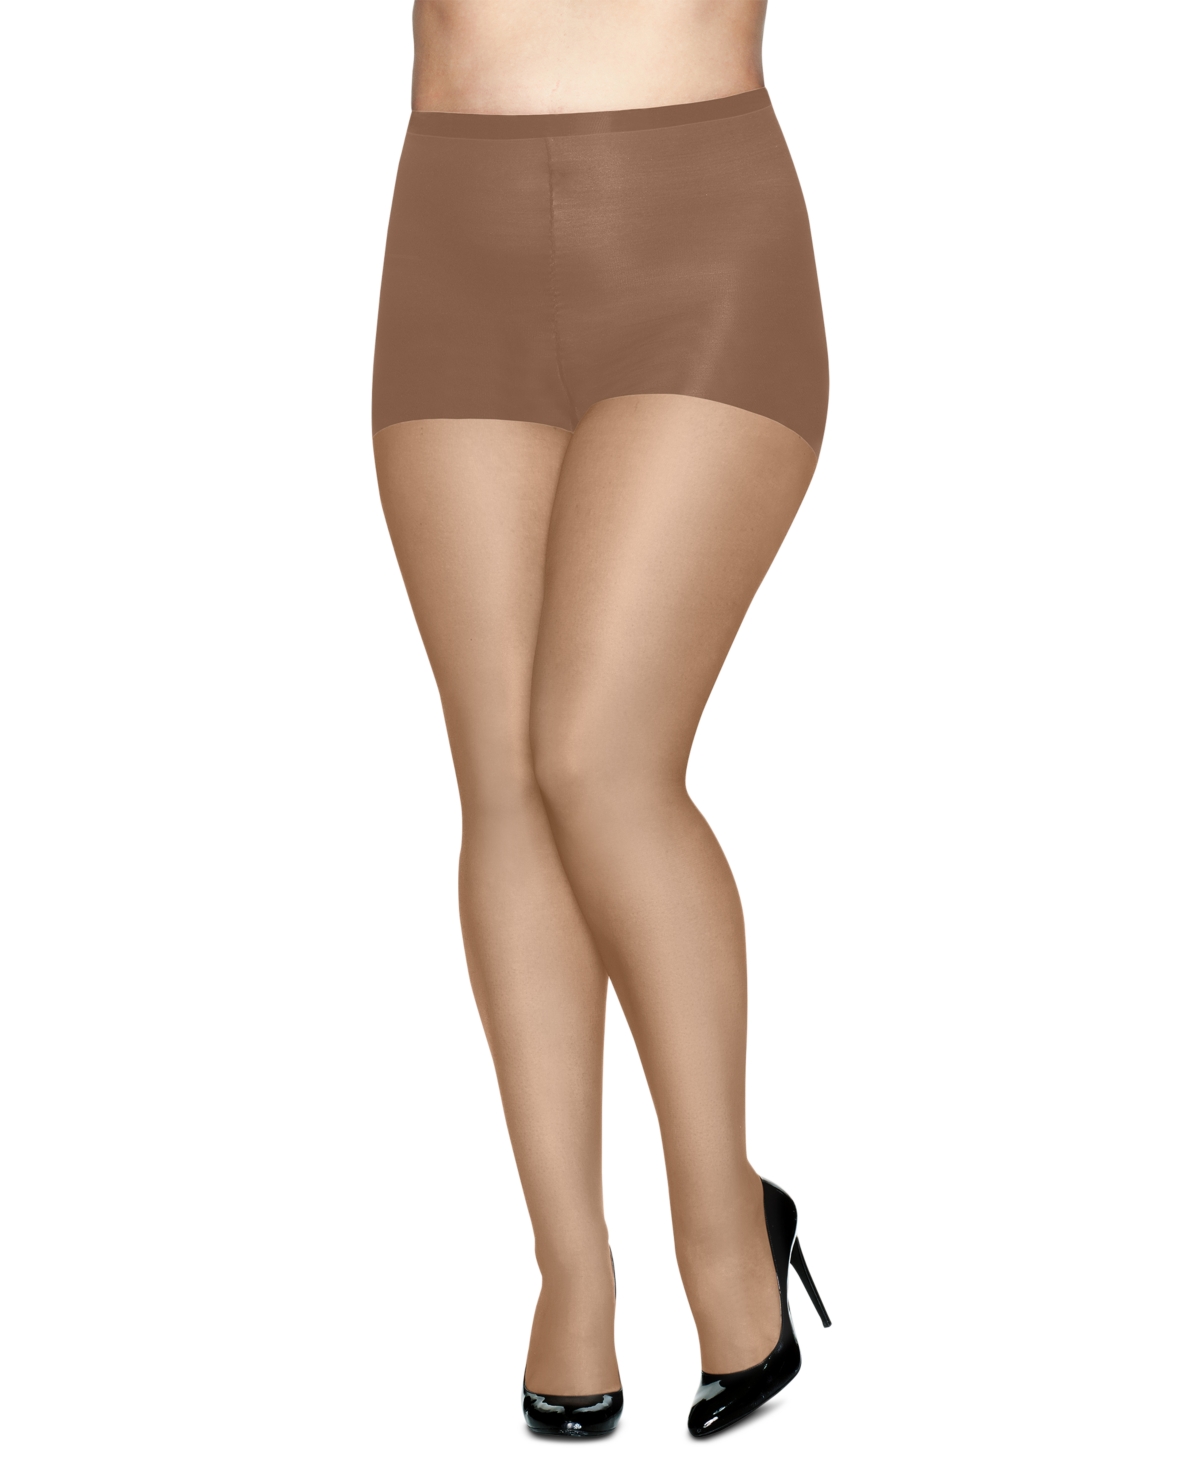 Hanes Plus Size Absolutely Ultra Sheer Control Top Pantyhose